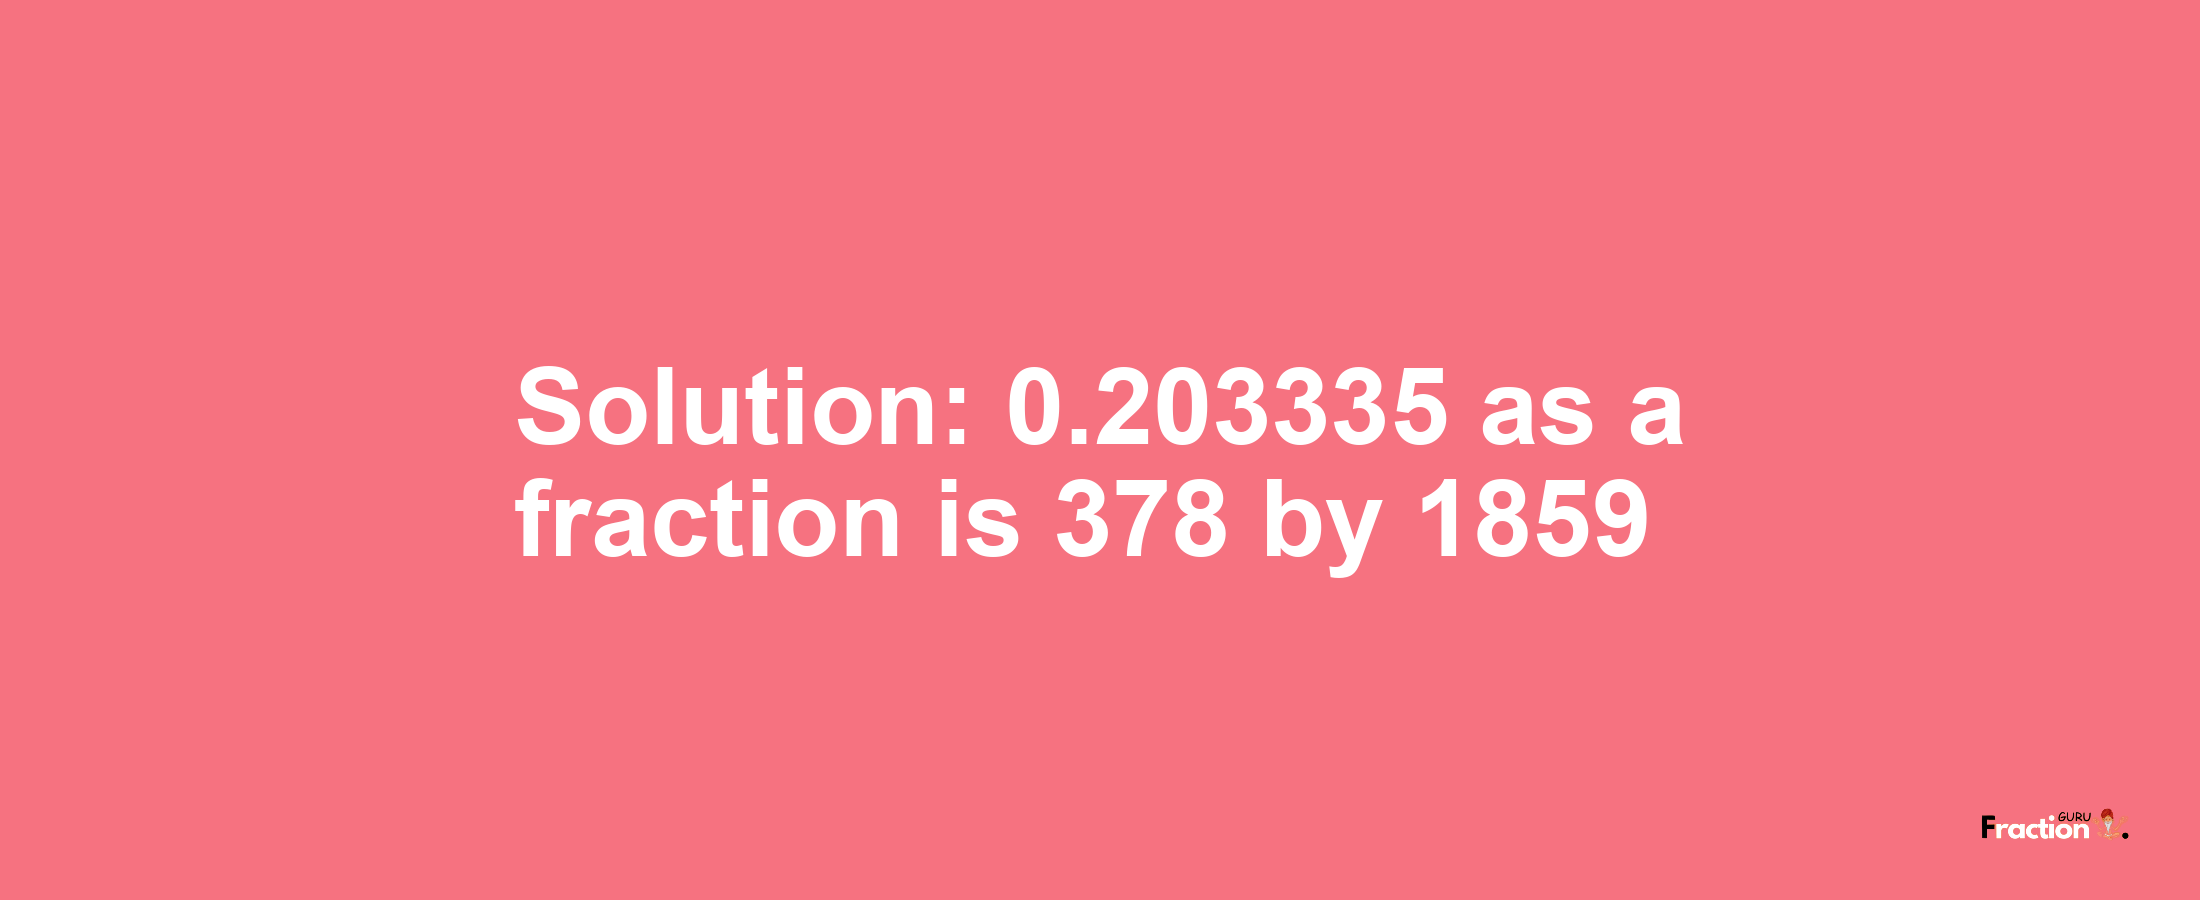 Solution:0.203335 as a fraction is 378/1859